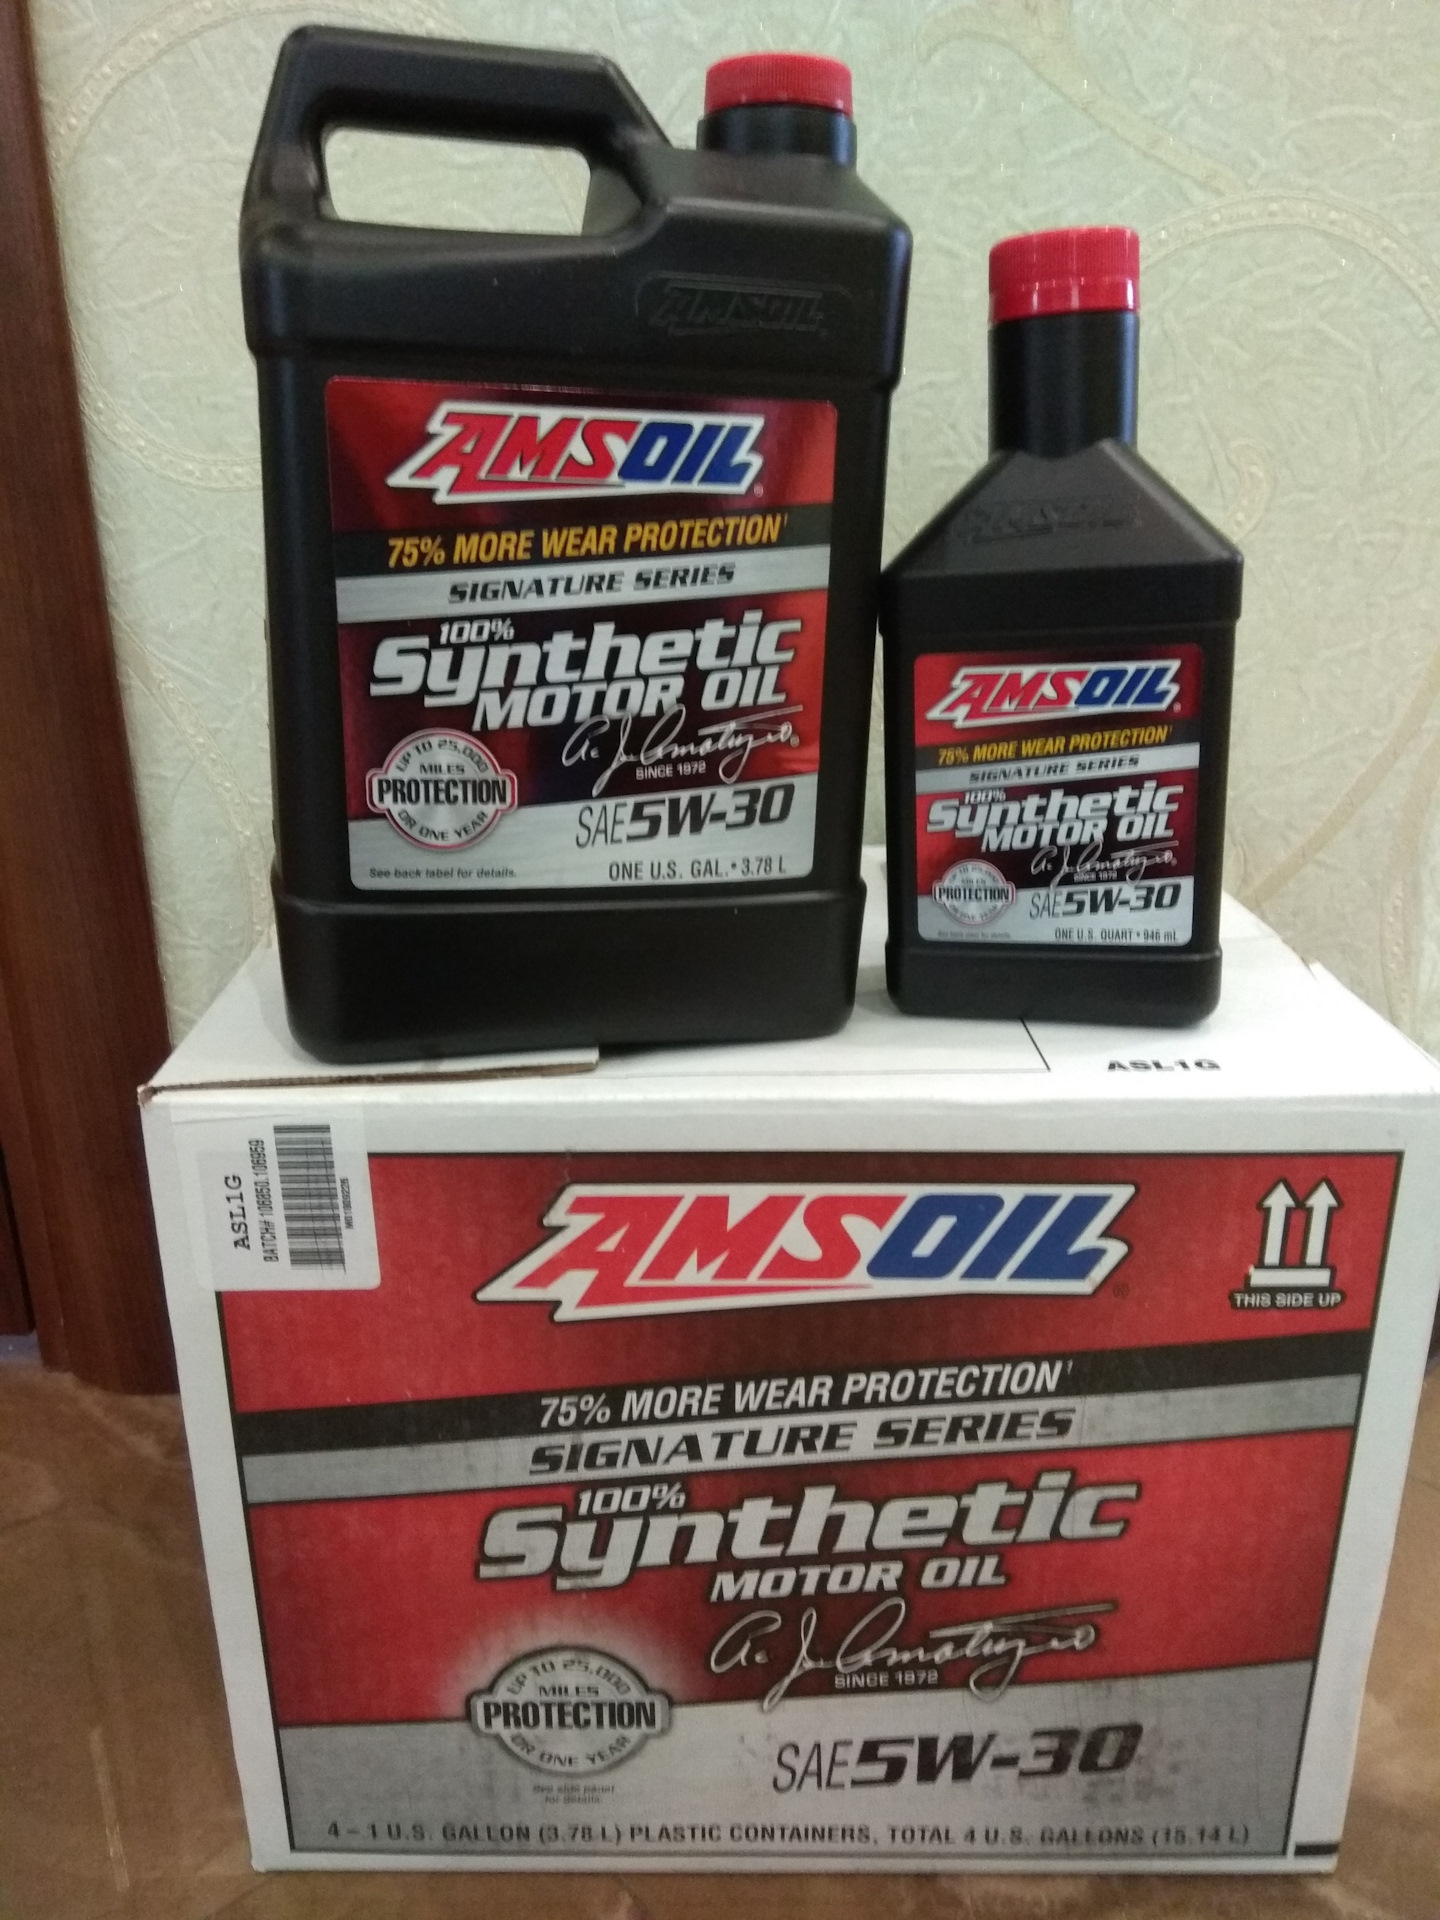 Amsoil signature series synthetic. AMSOIL Signature Series Synthetic 5w-30. AMSOIL 5w60 VAG. AMSOIL Signature Series 100% Synthetic 5w30 (asl1g),. AMSOIL Signature Series 5w-30 Synthetic Motor oi.